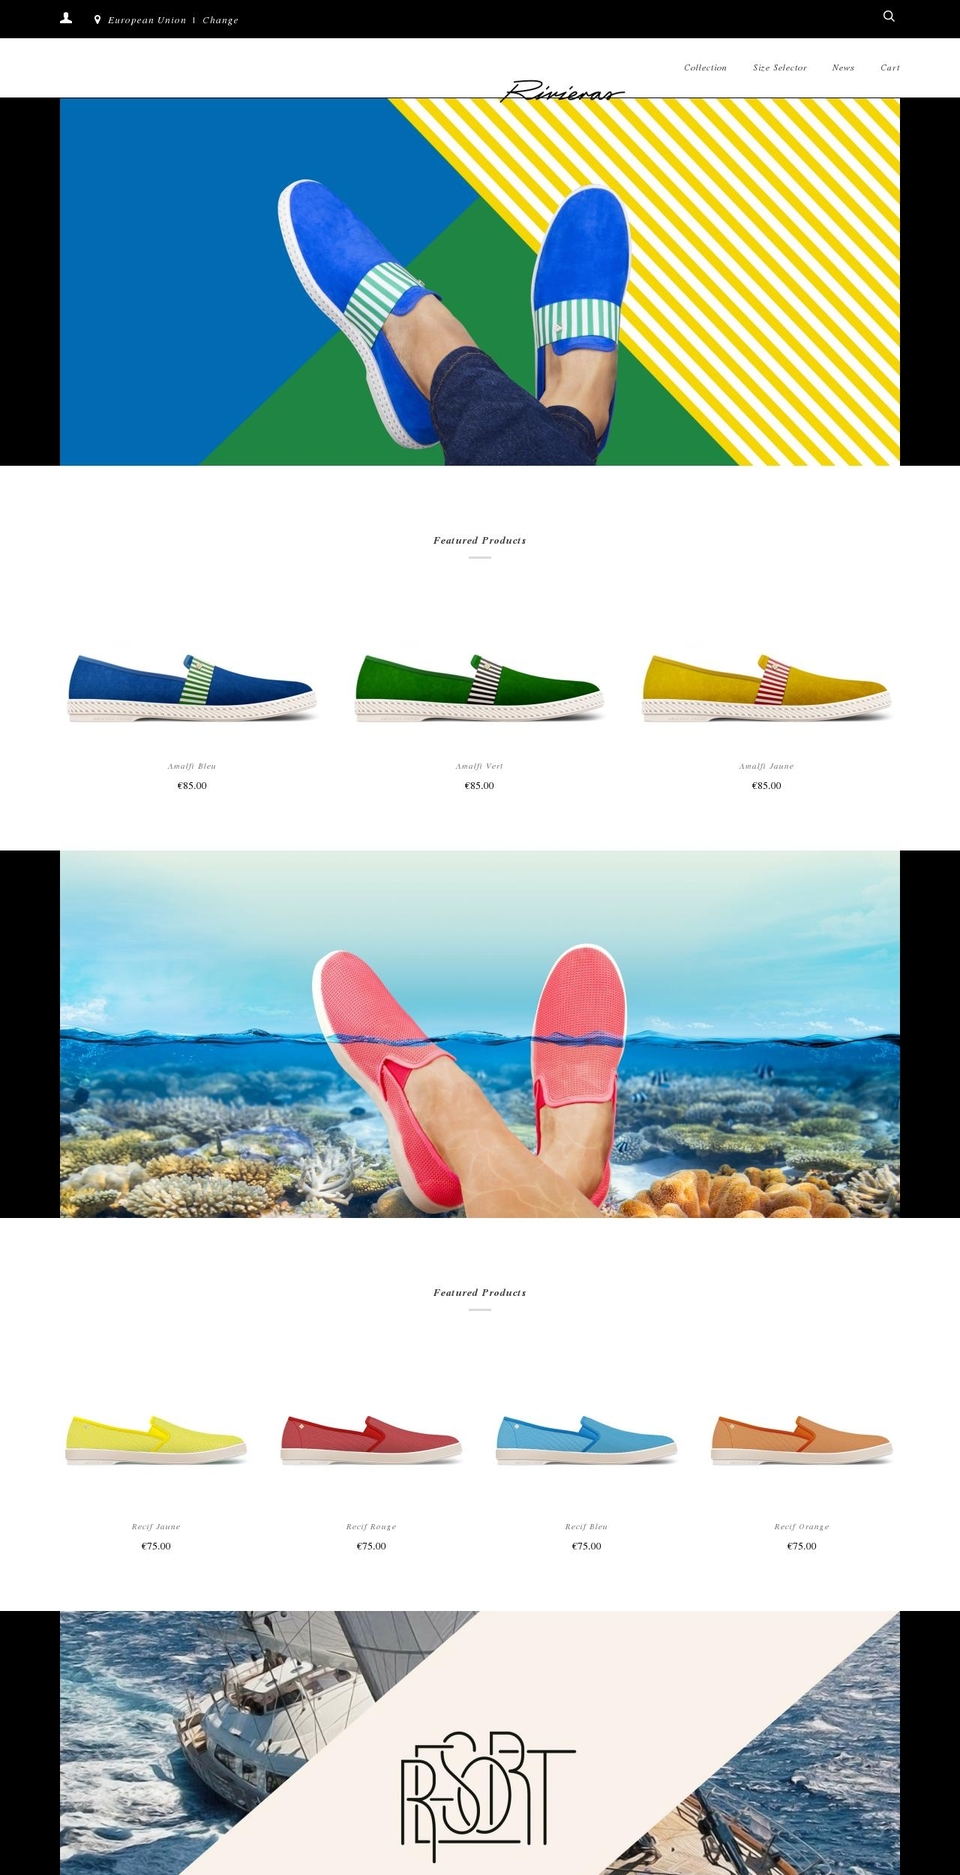 Rivieras [Plus]-TH-July-30-2018 Shopify theme site example rivieras.shoes